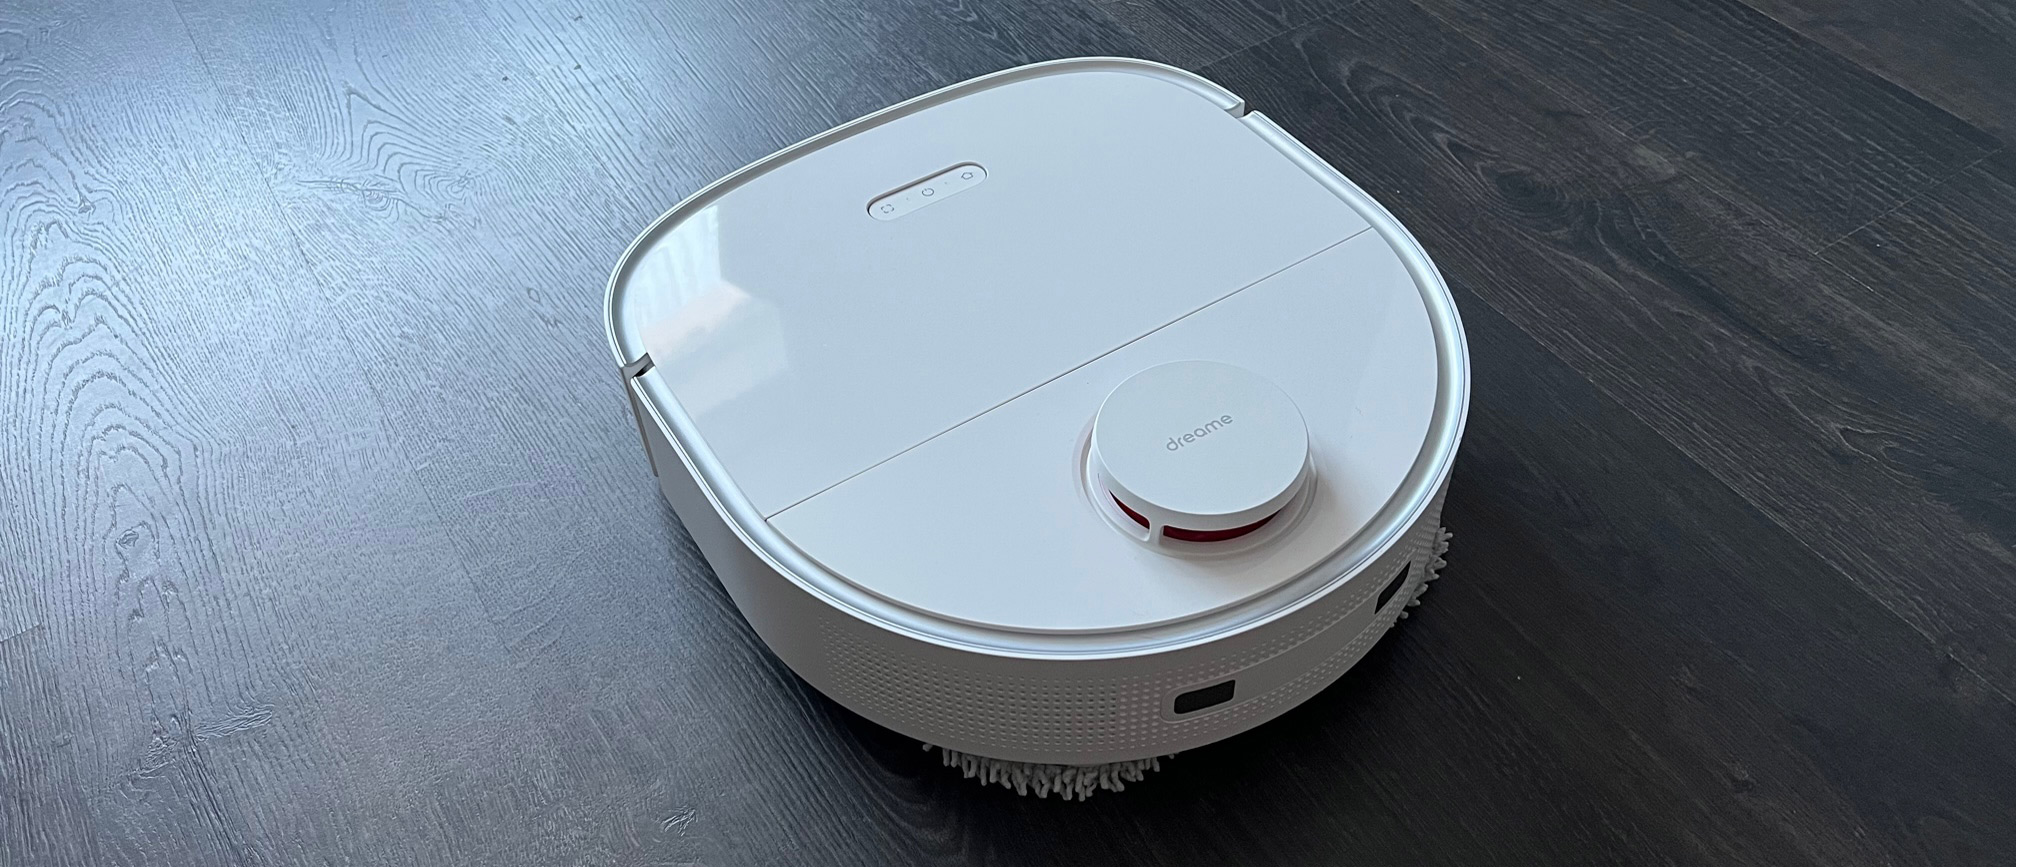 Dreame W10/W10 Pro Smart Robot Vacuum and Mop